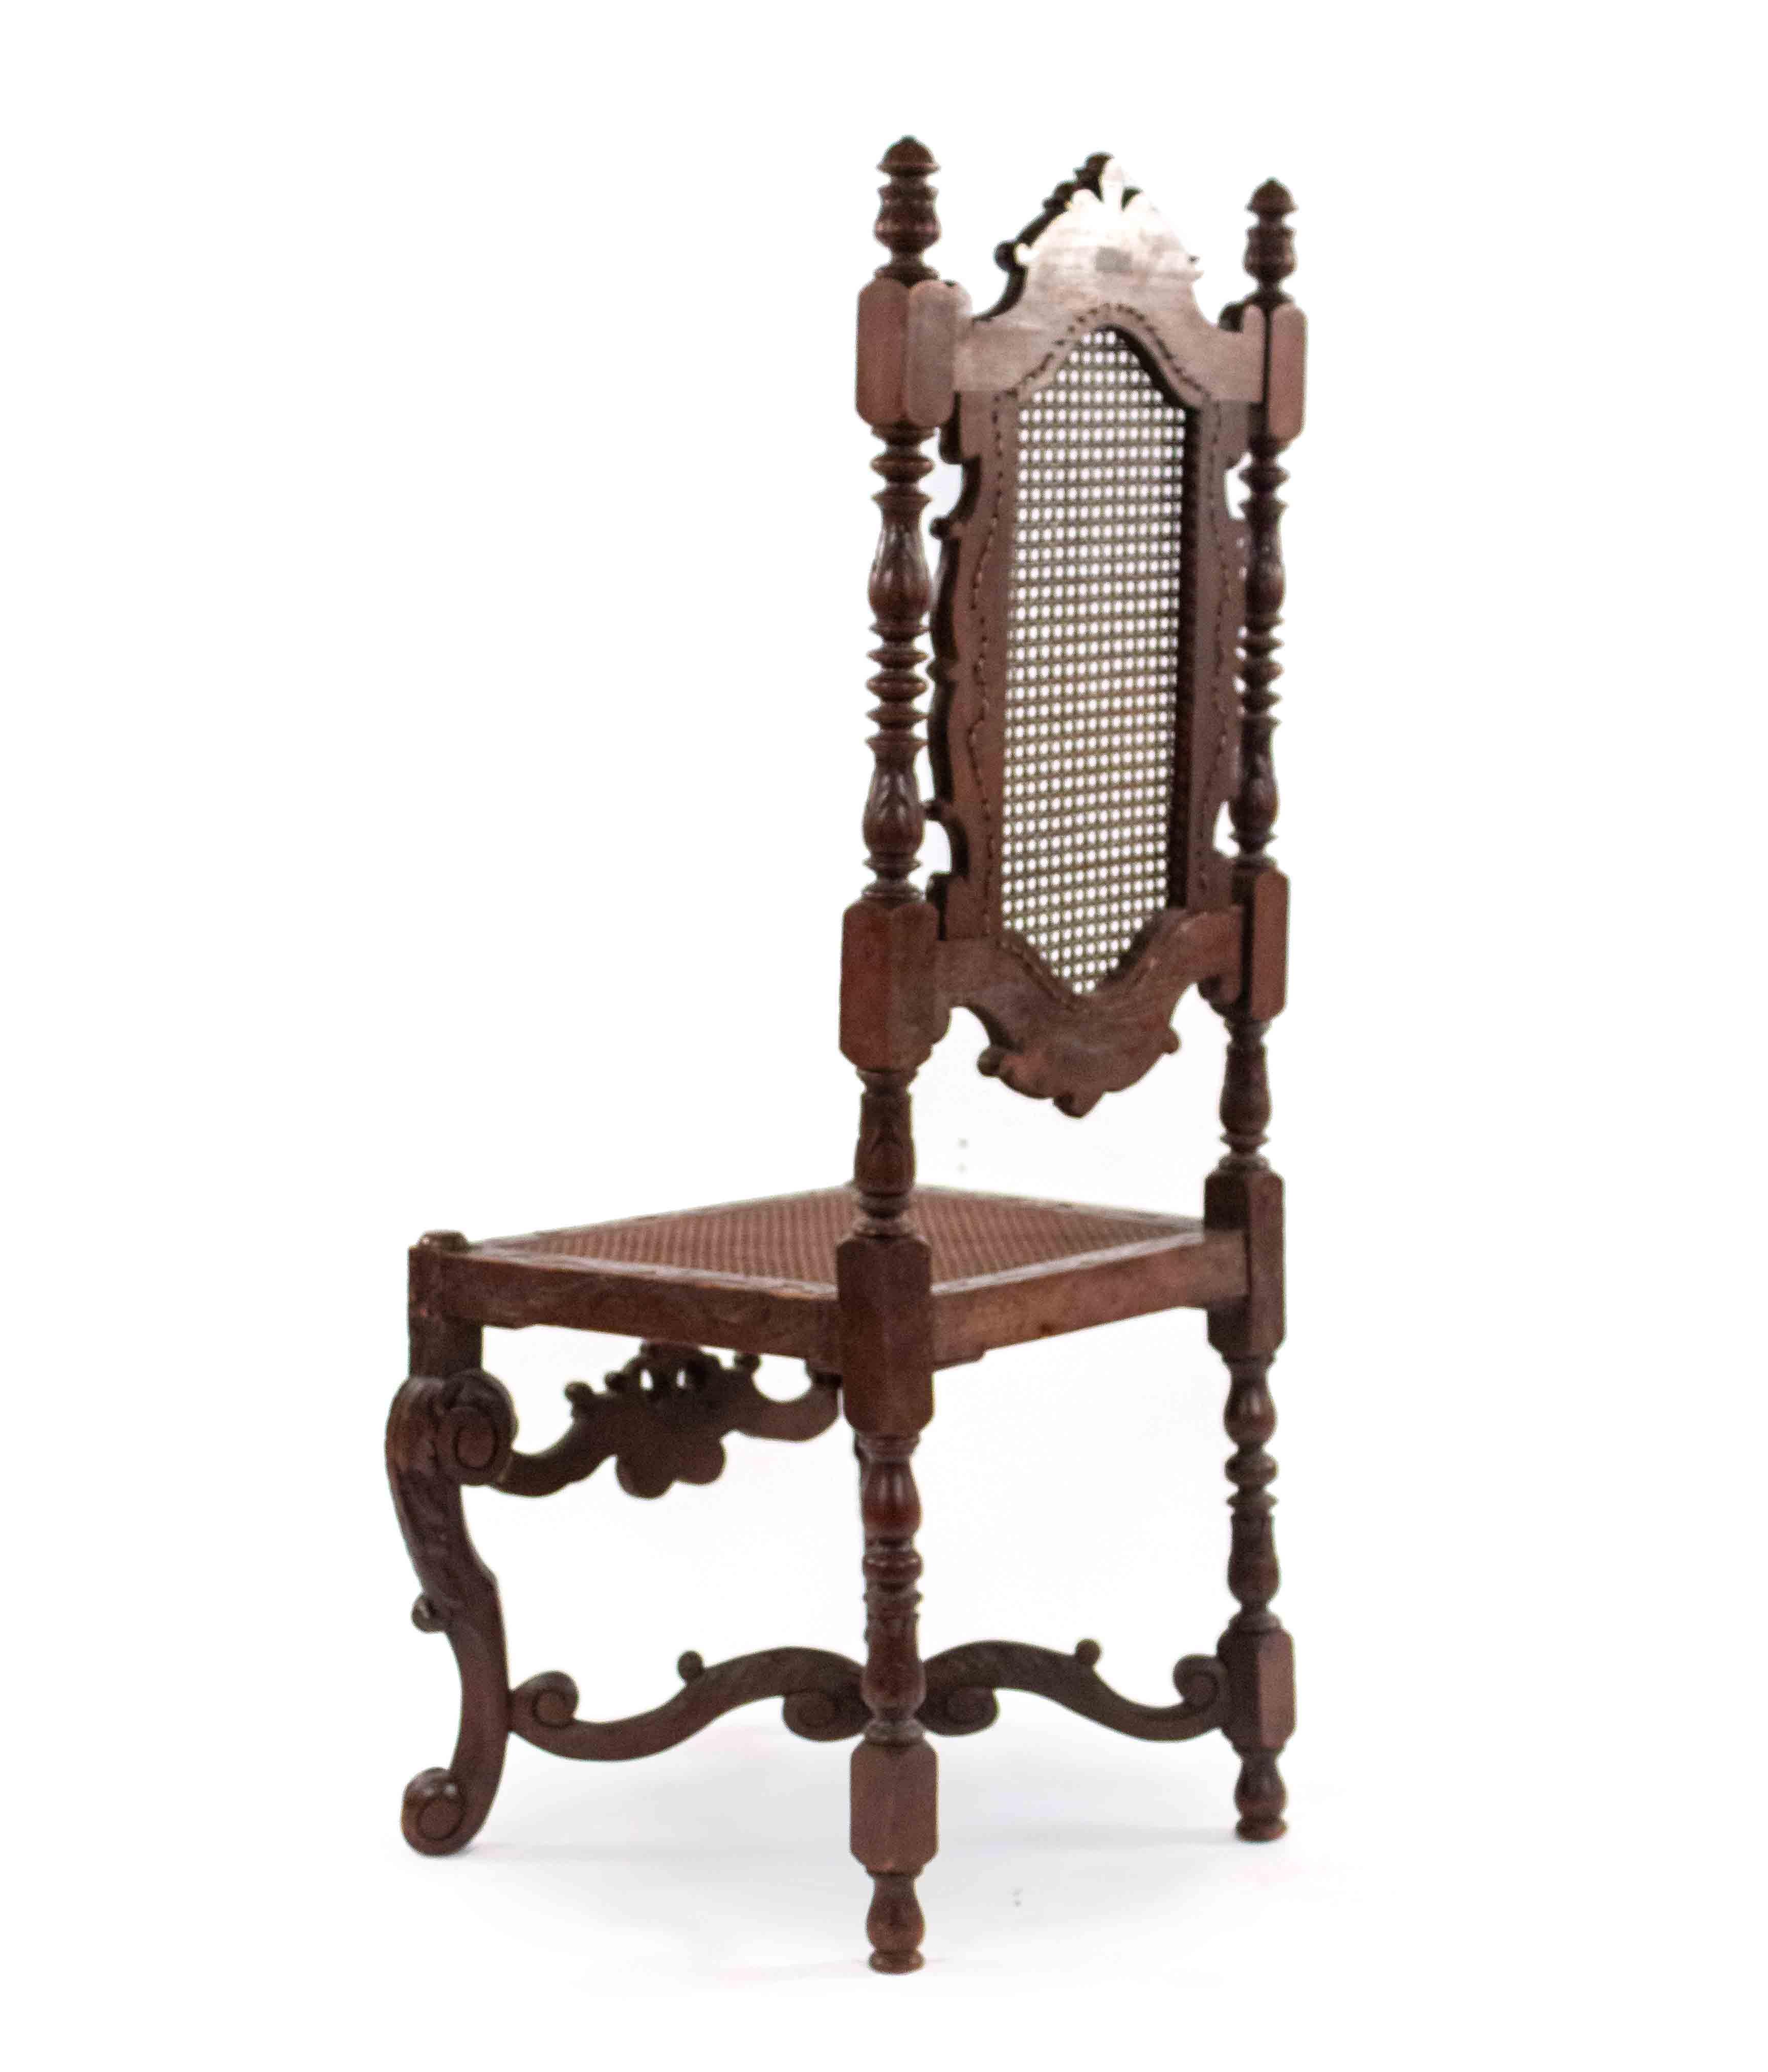 Pair of 19th century English Jacobean-style walnut side chairs with cane seat and back with finial on stretcher.